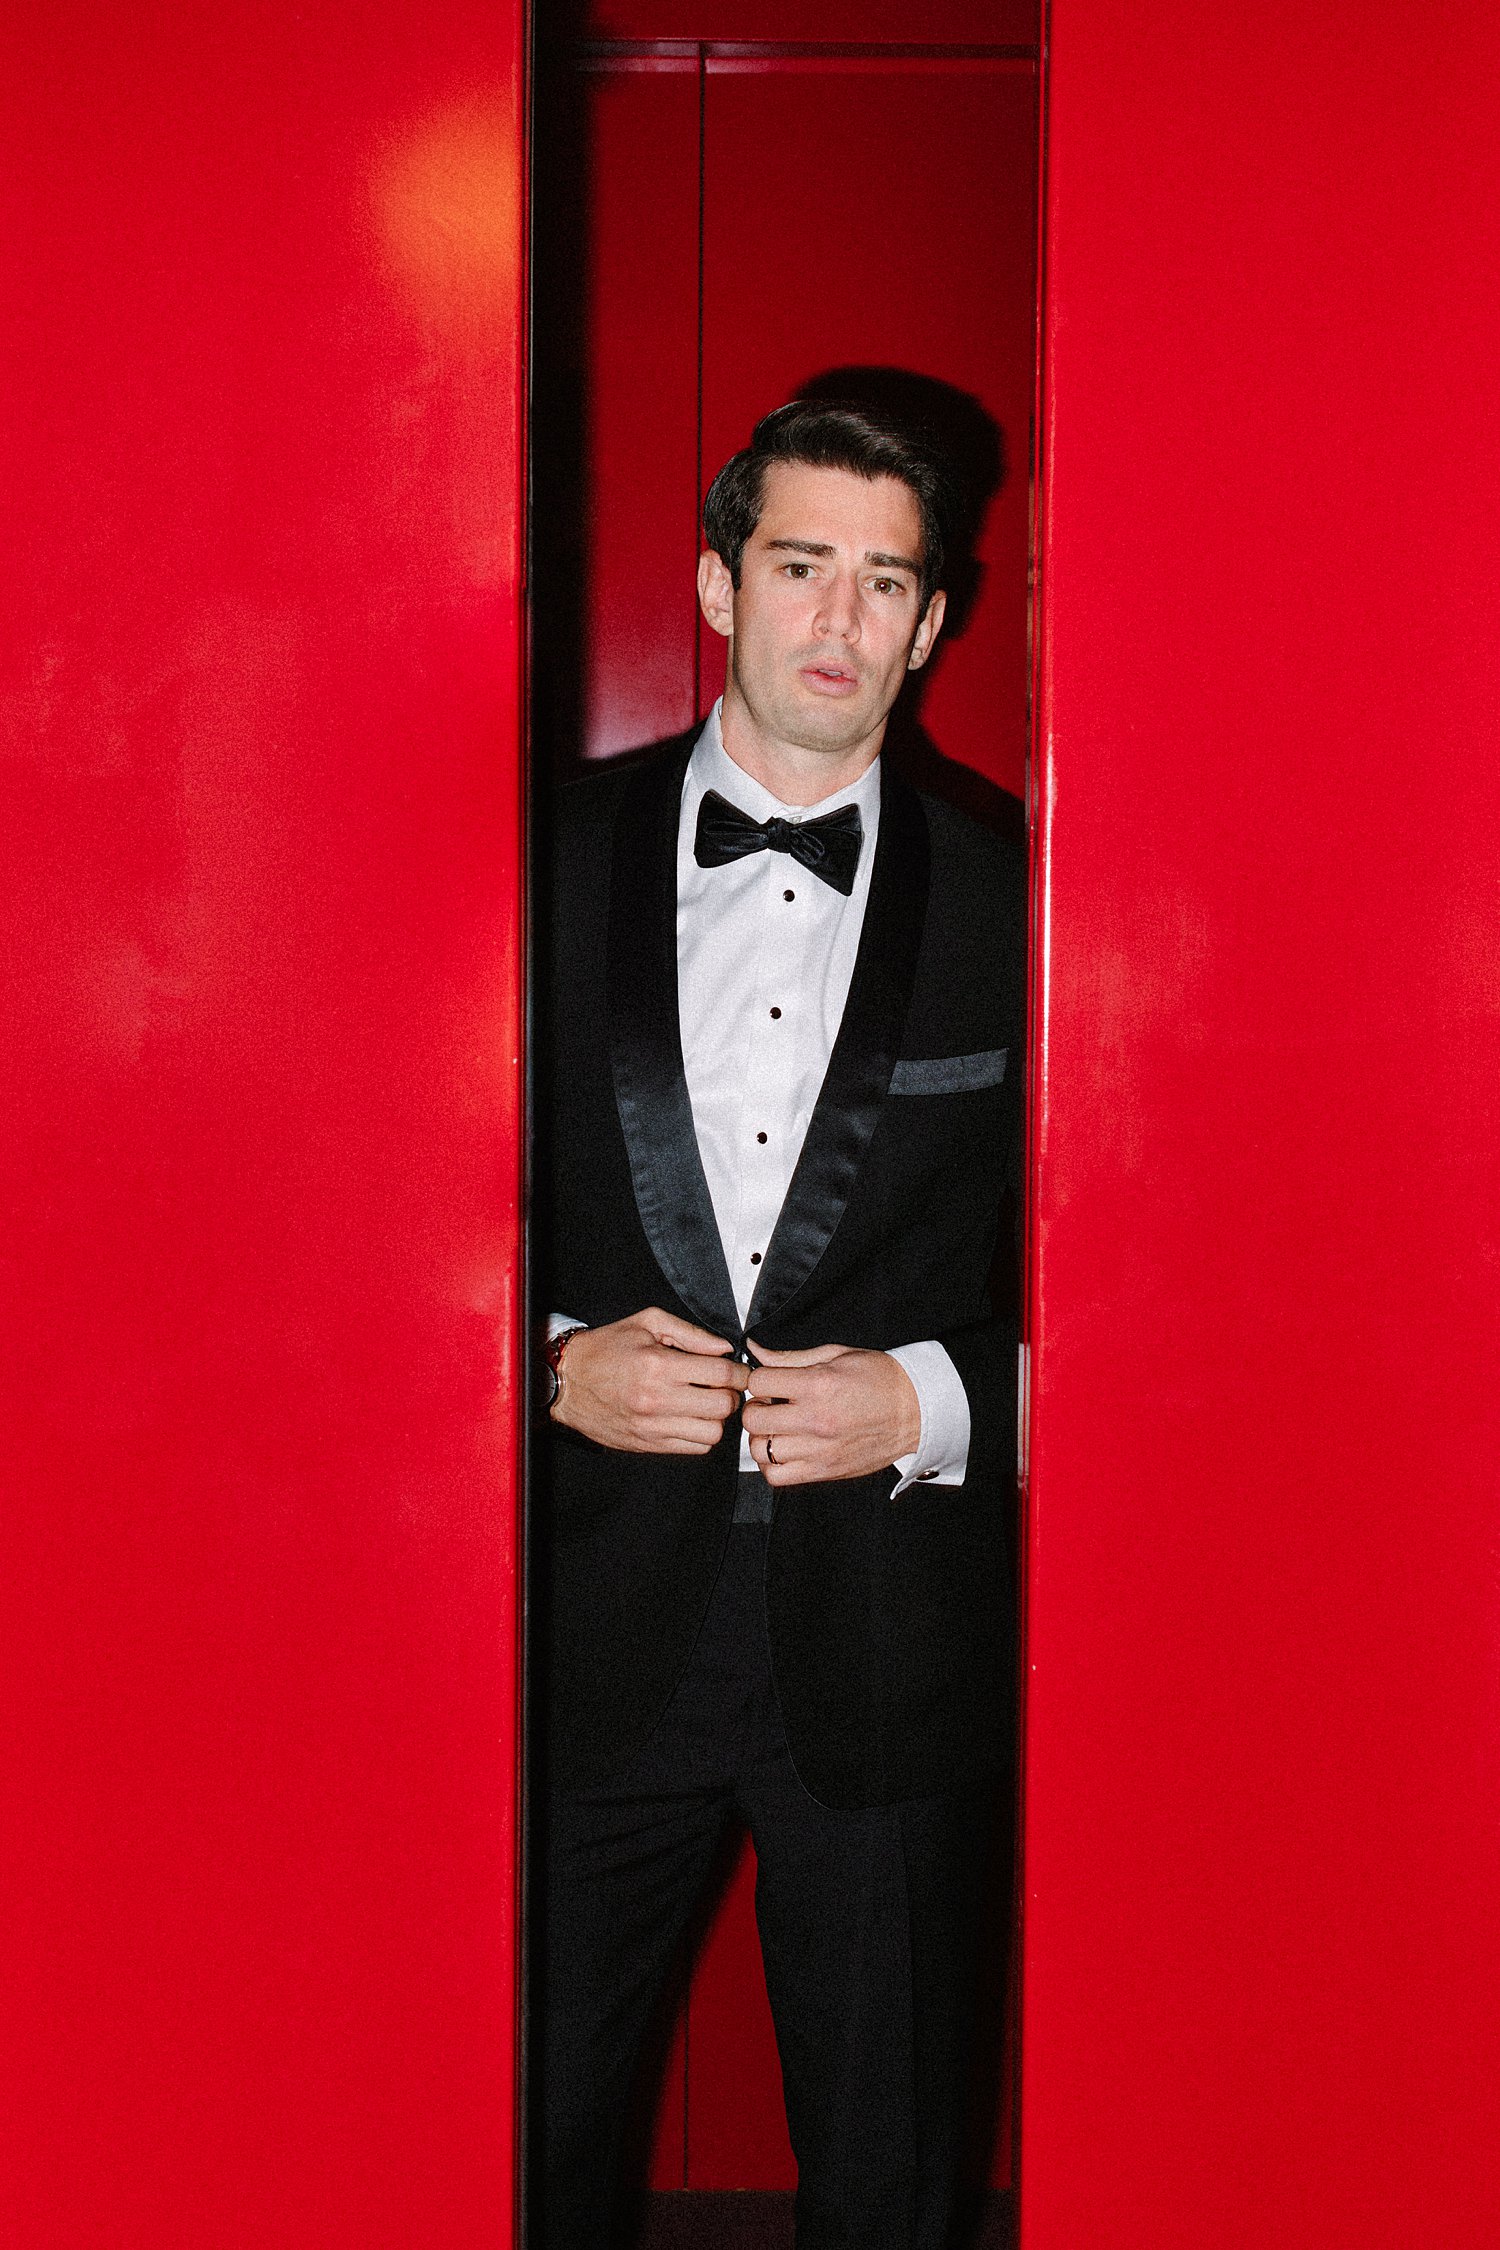 Man in black tuxedo and bowtie standing in red elevator at Virgin Hotel Dallas